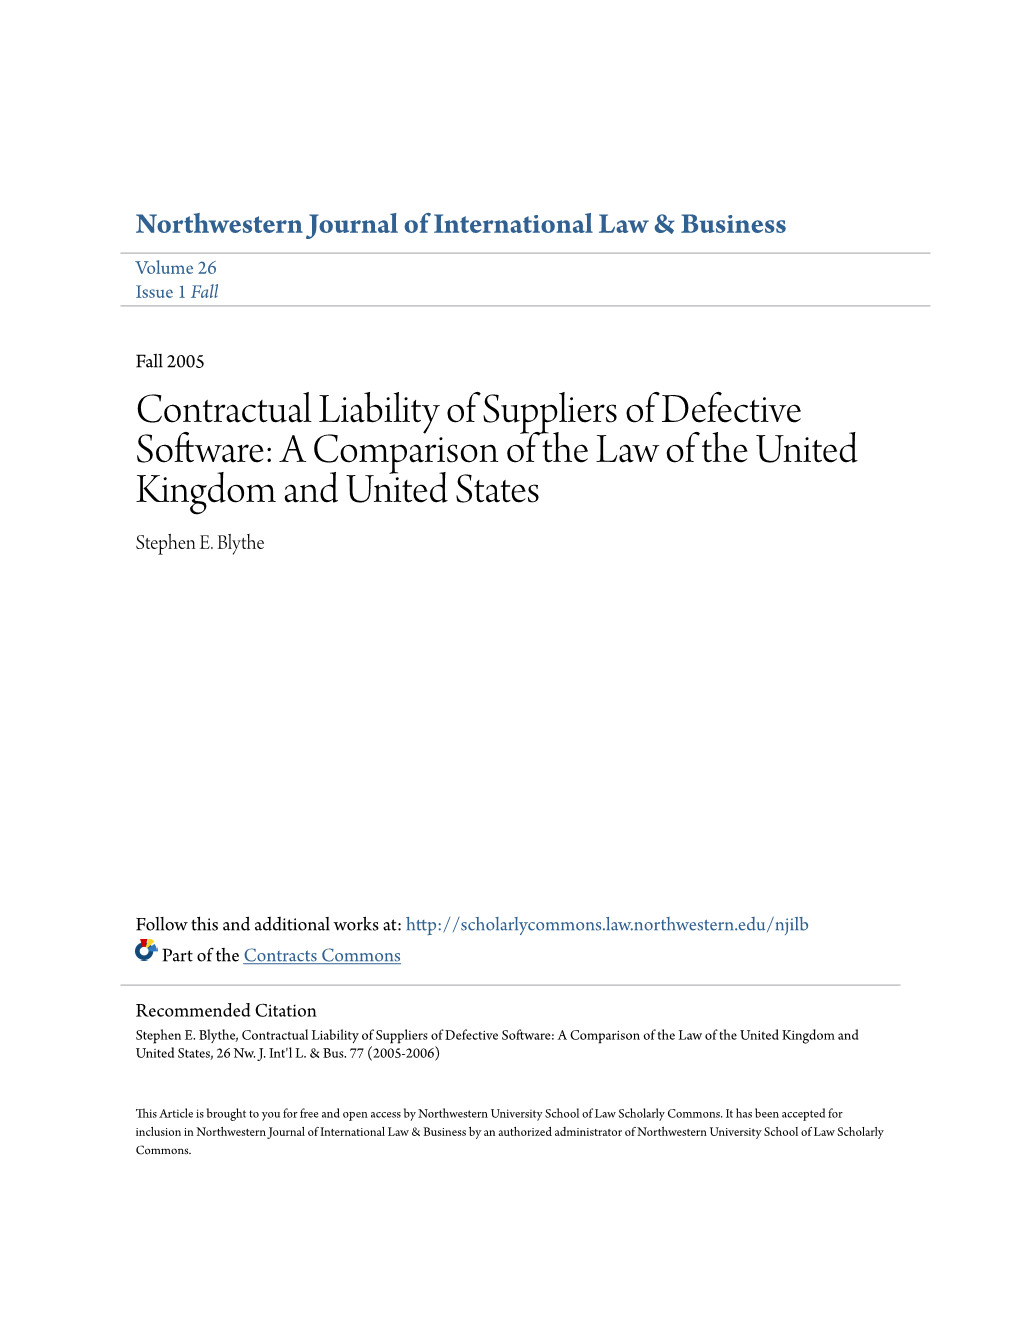 Contractual Liability of Suppliers of Defective Software: a Comparison of the Law of the United Kingdom and United States Stephen E